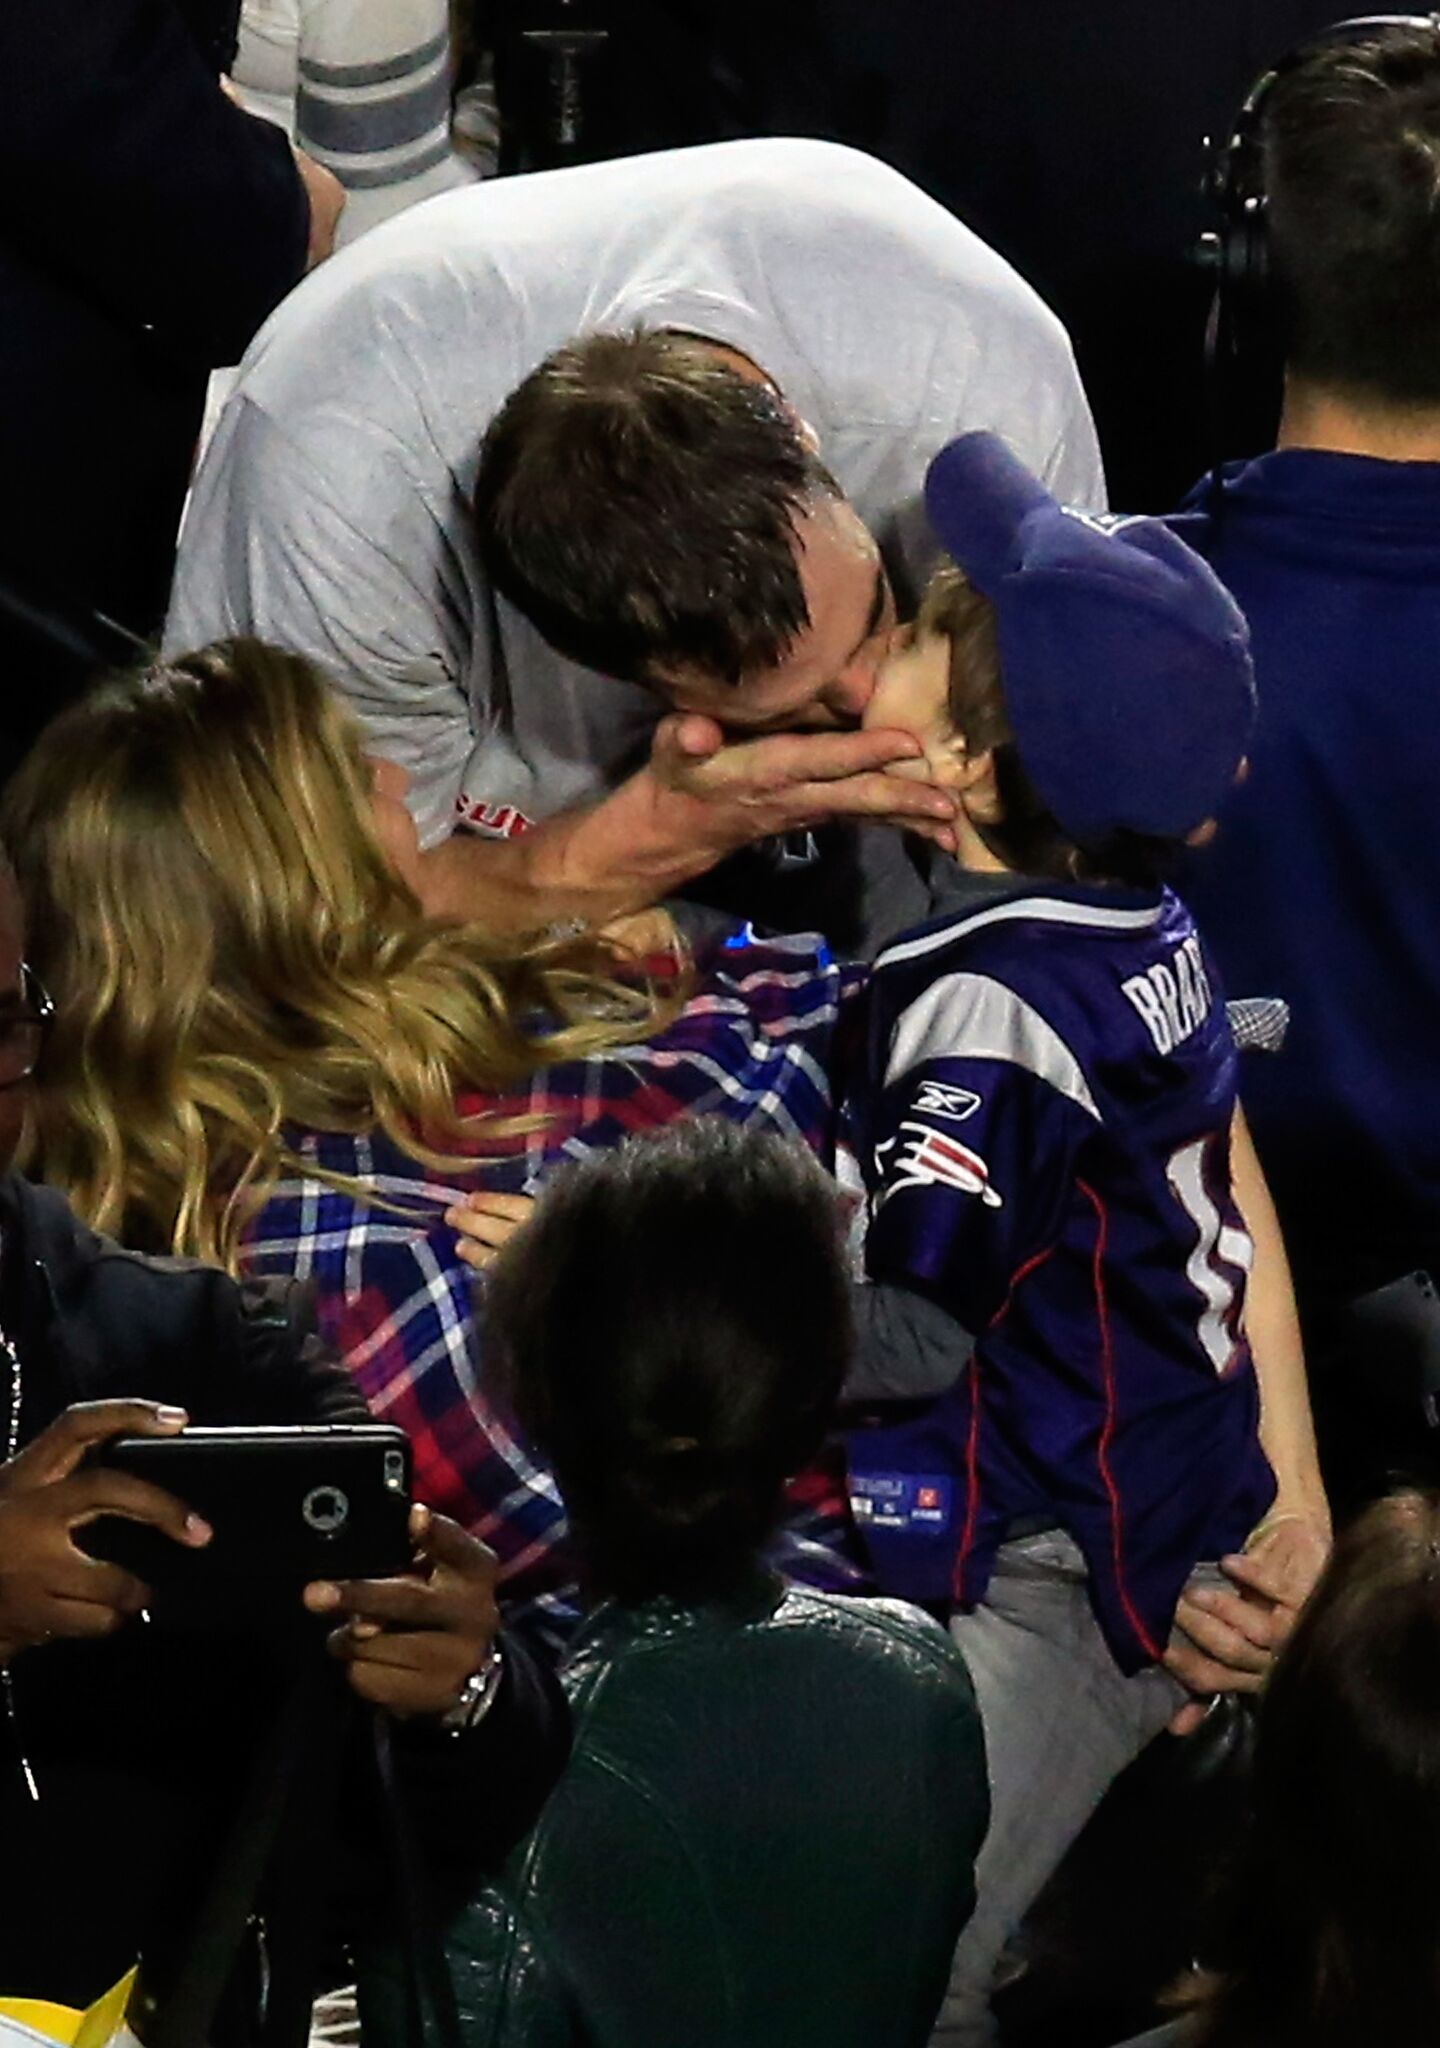 Tom Brady #12 of the New England Patriots celebrates defeating the Seattle Seahawks with his wife Gisele Bundchen and son Benjamin during Super Bowl XLIX at University of Phoenix Stadium | Getty Images